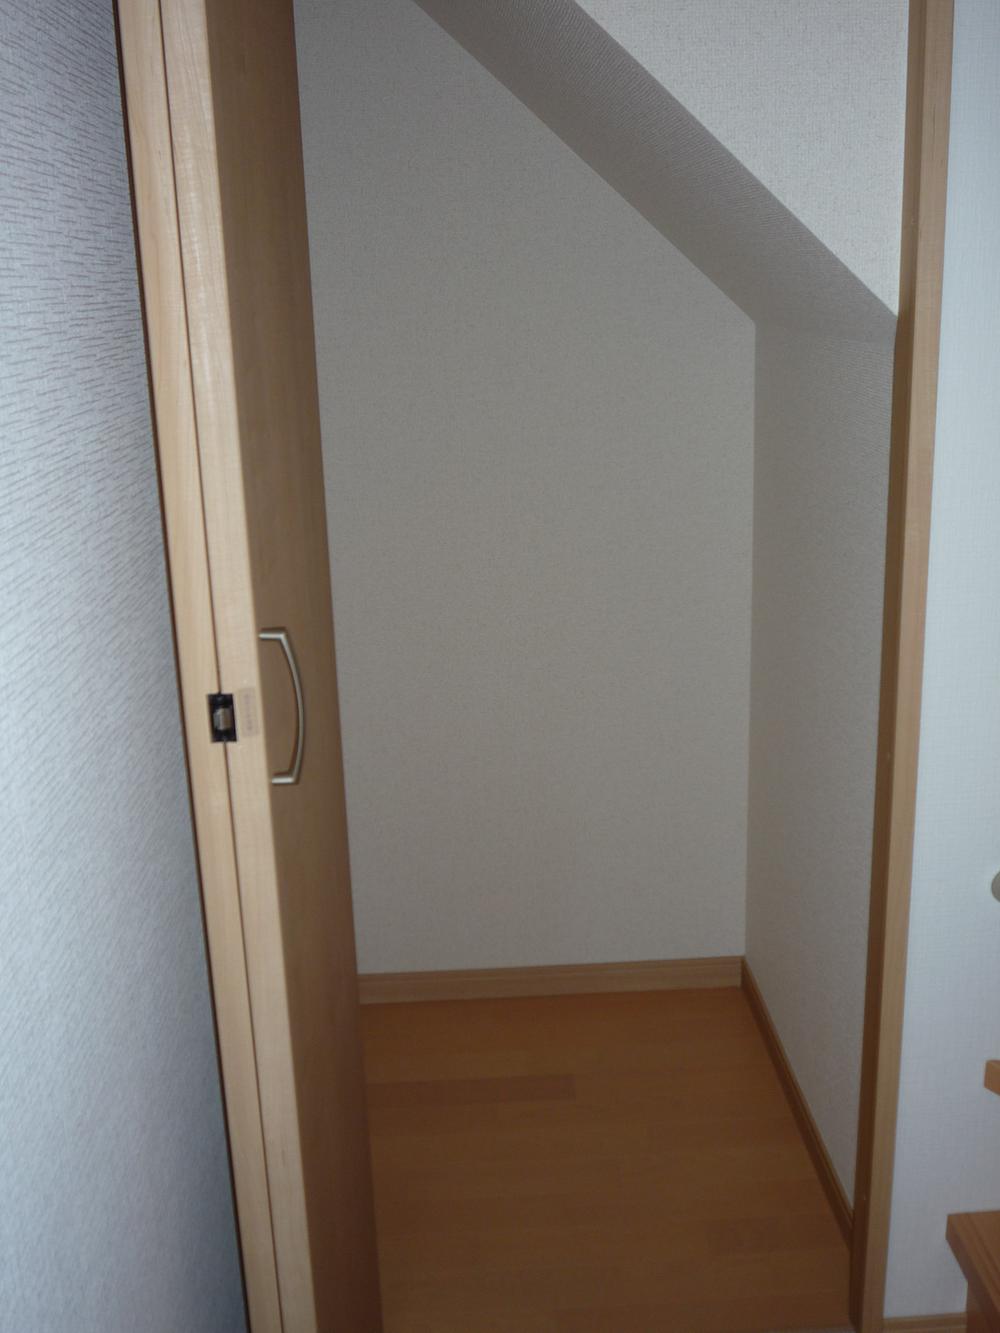 Same specifications photos (Other introspection). Stairs under storage